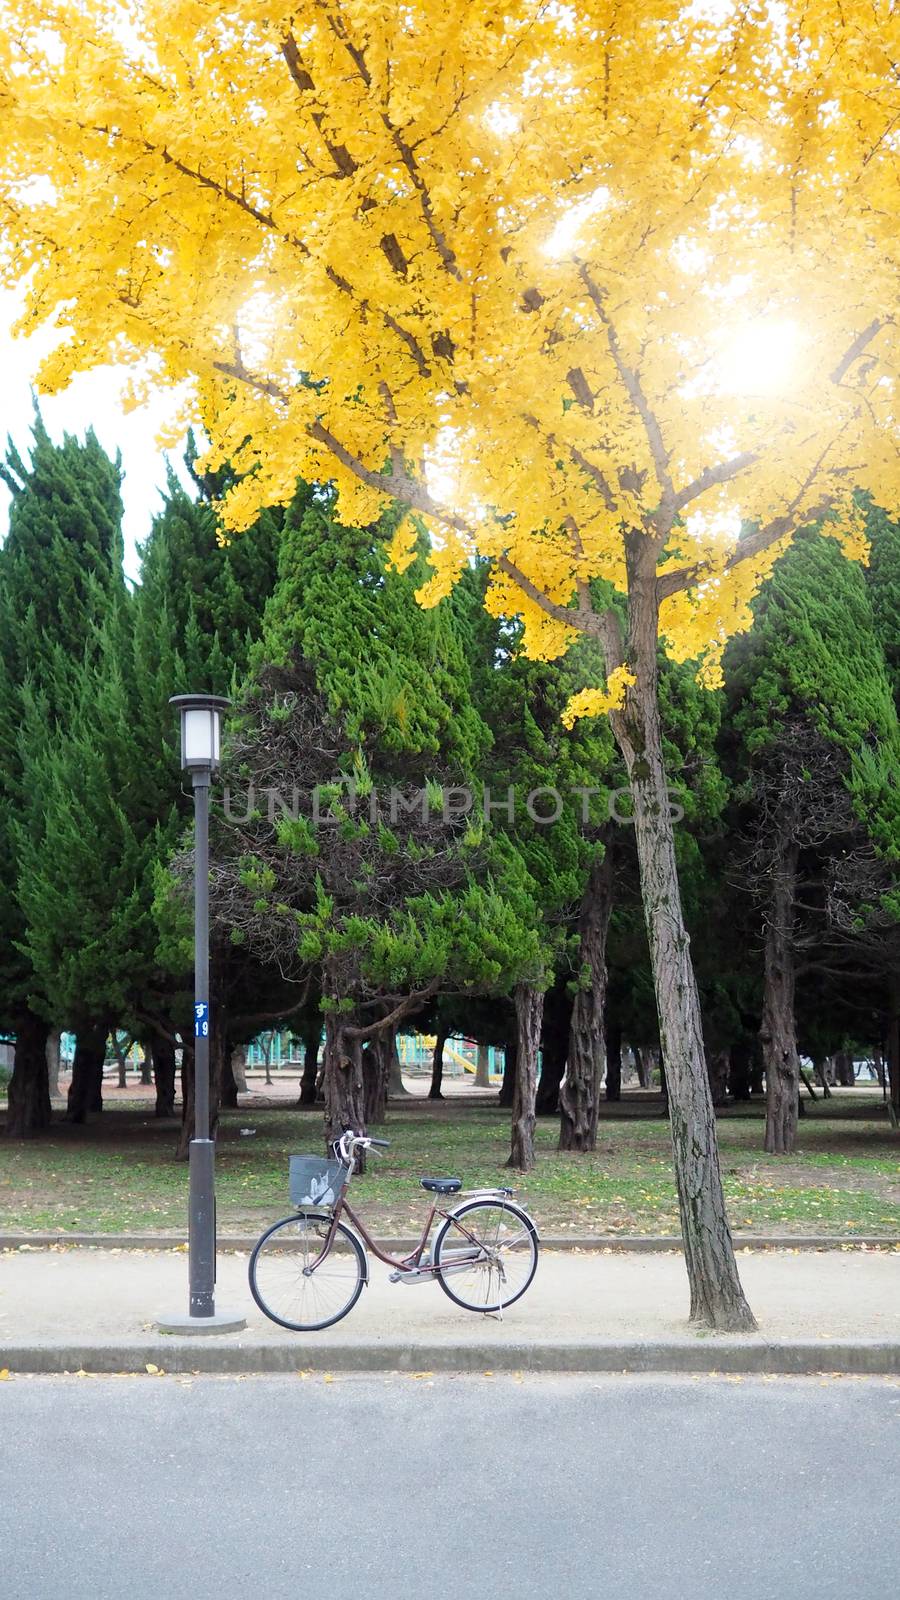 Yellow leaf tree in autumn and little old bicycle. by gnepphoto